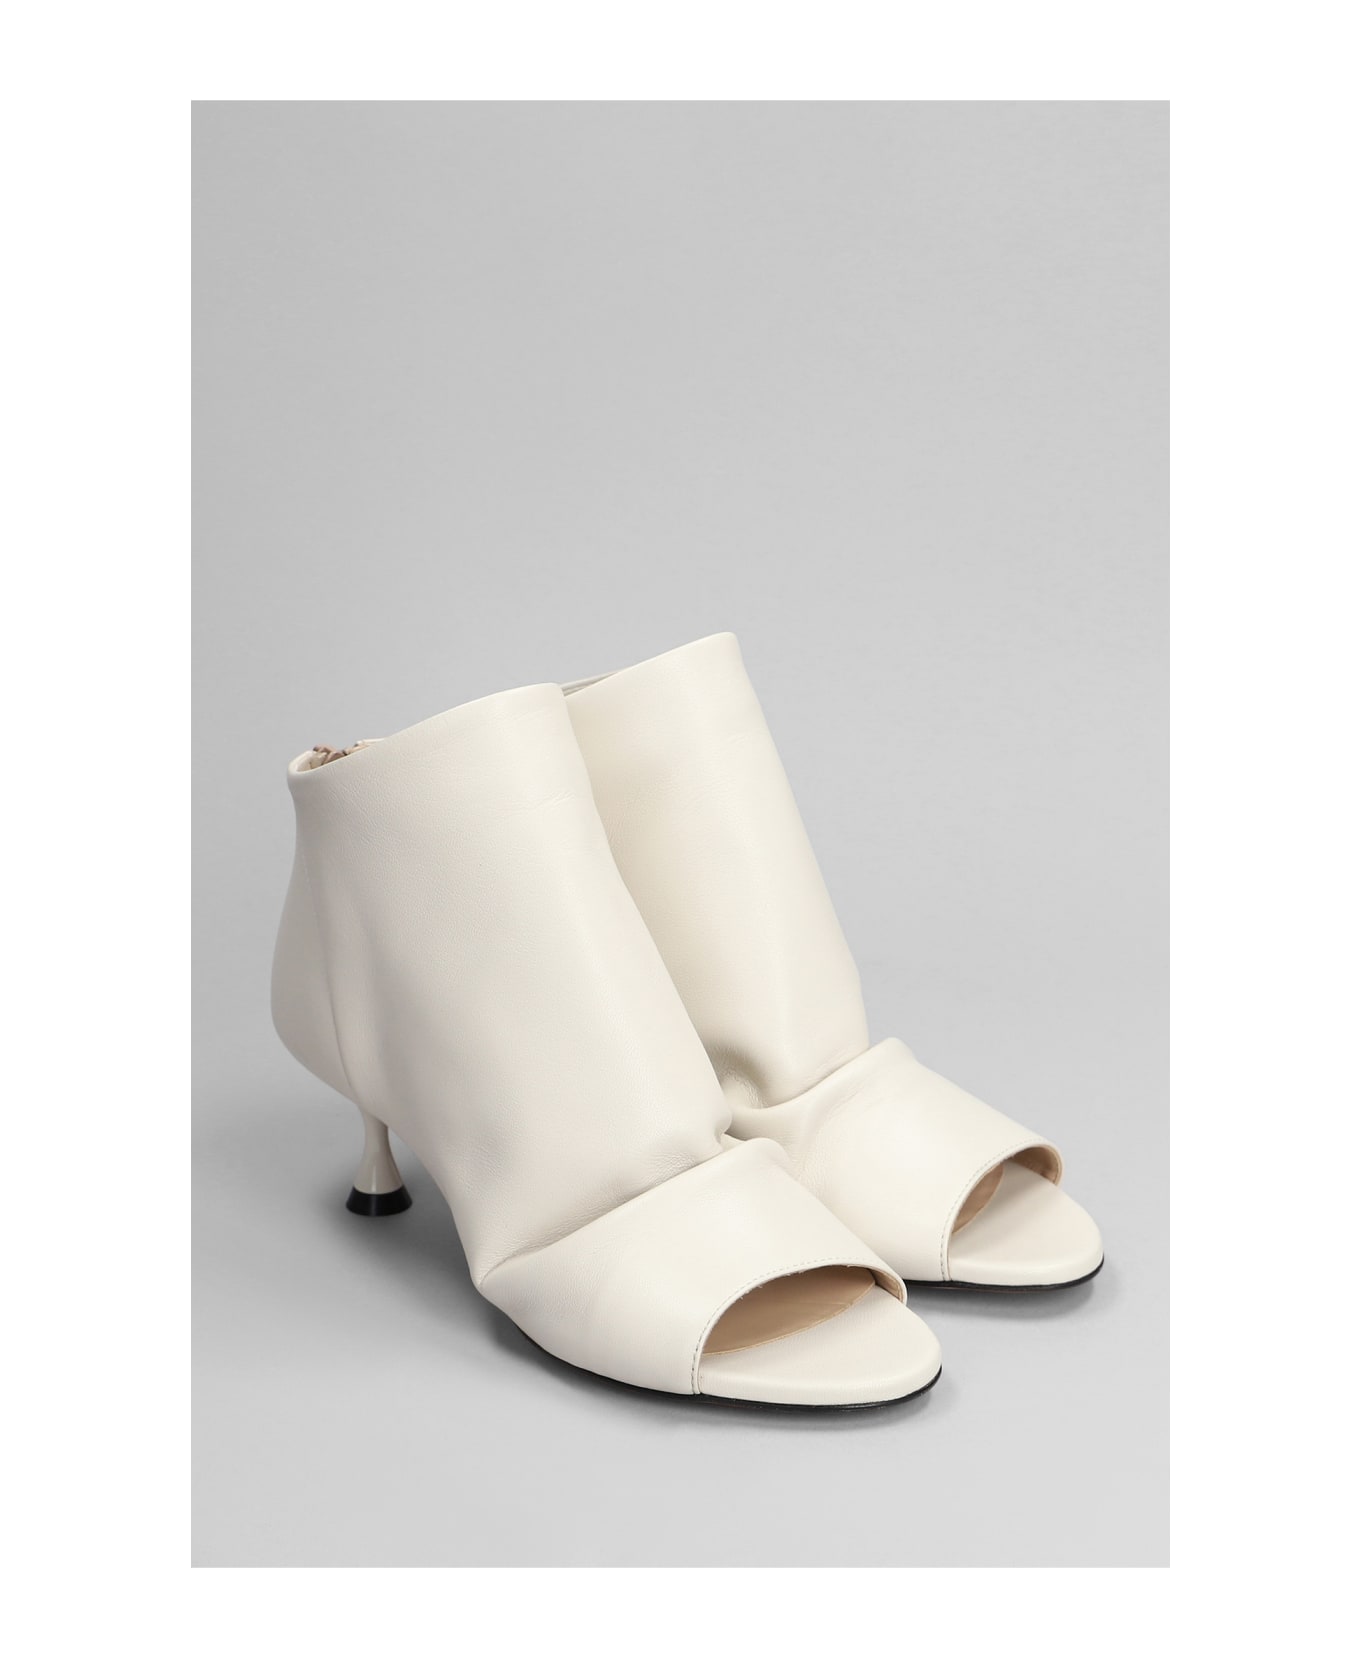 Marc Ellis High Heels Ankle Boots In Beige Leather - beige ブーツ